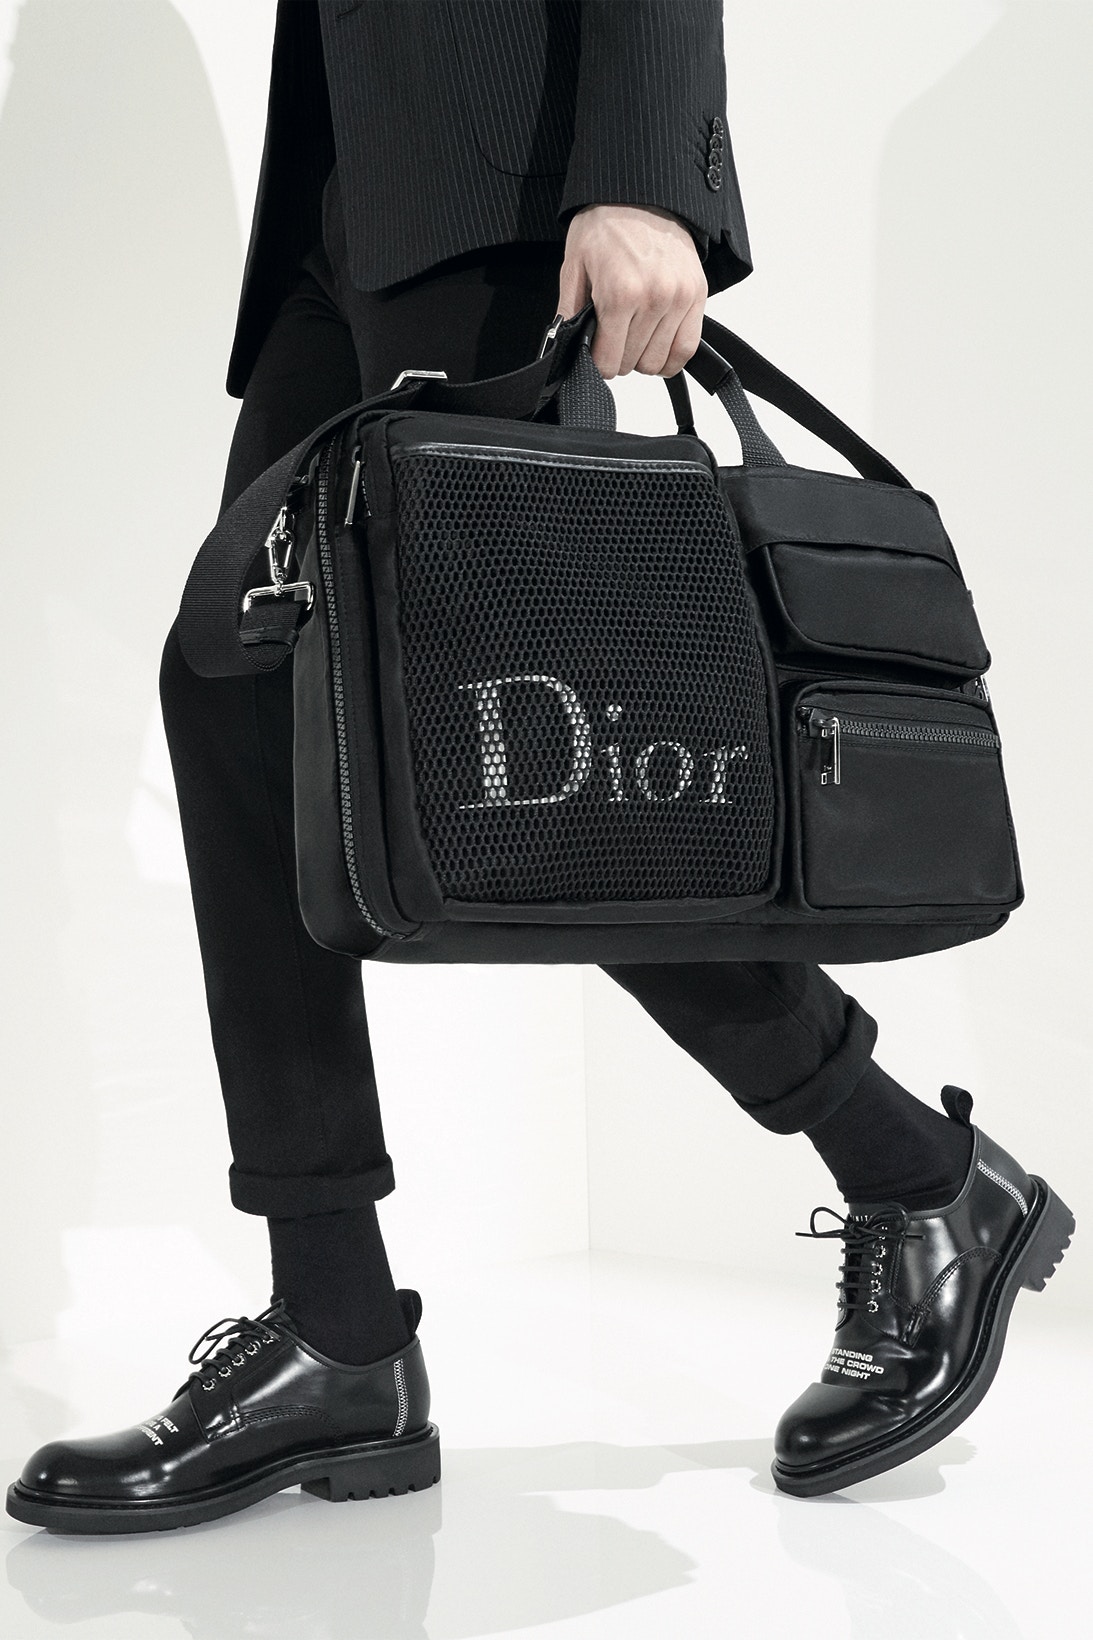 Dior Homme Are Showing-Off Their Playground Bag Collection